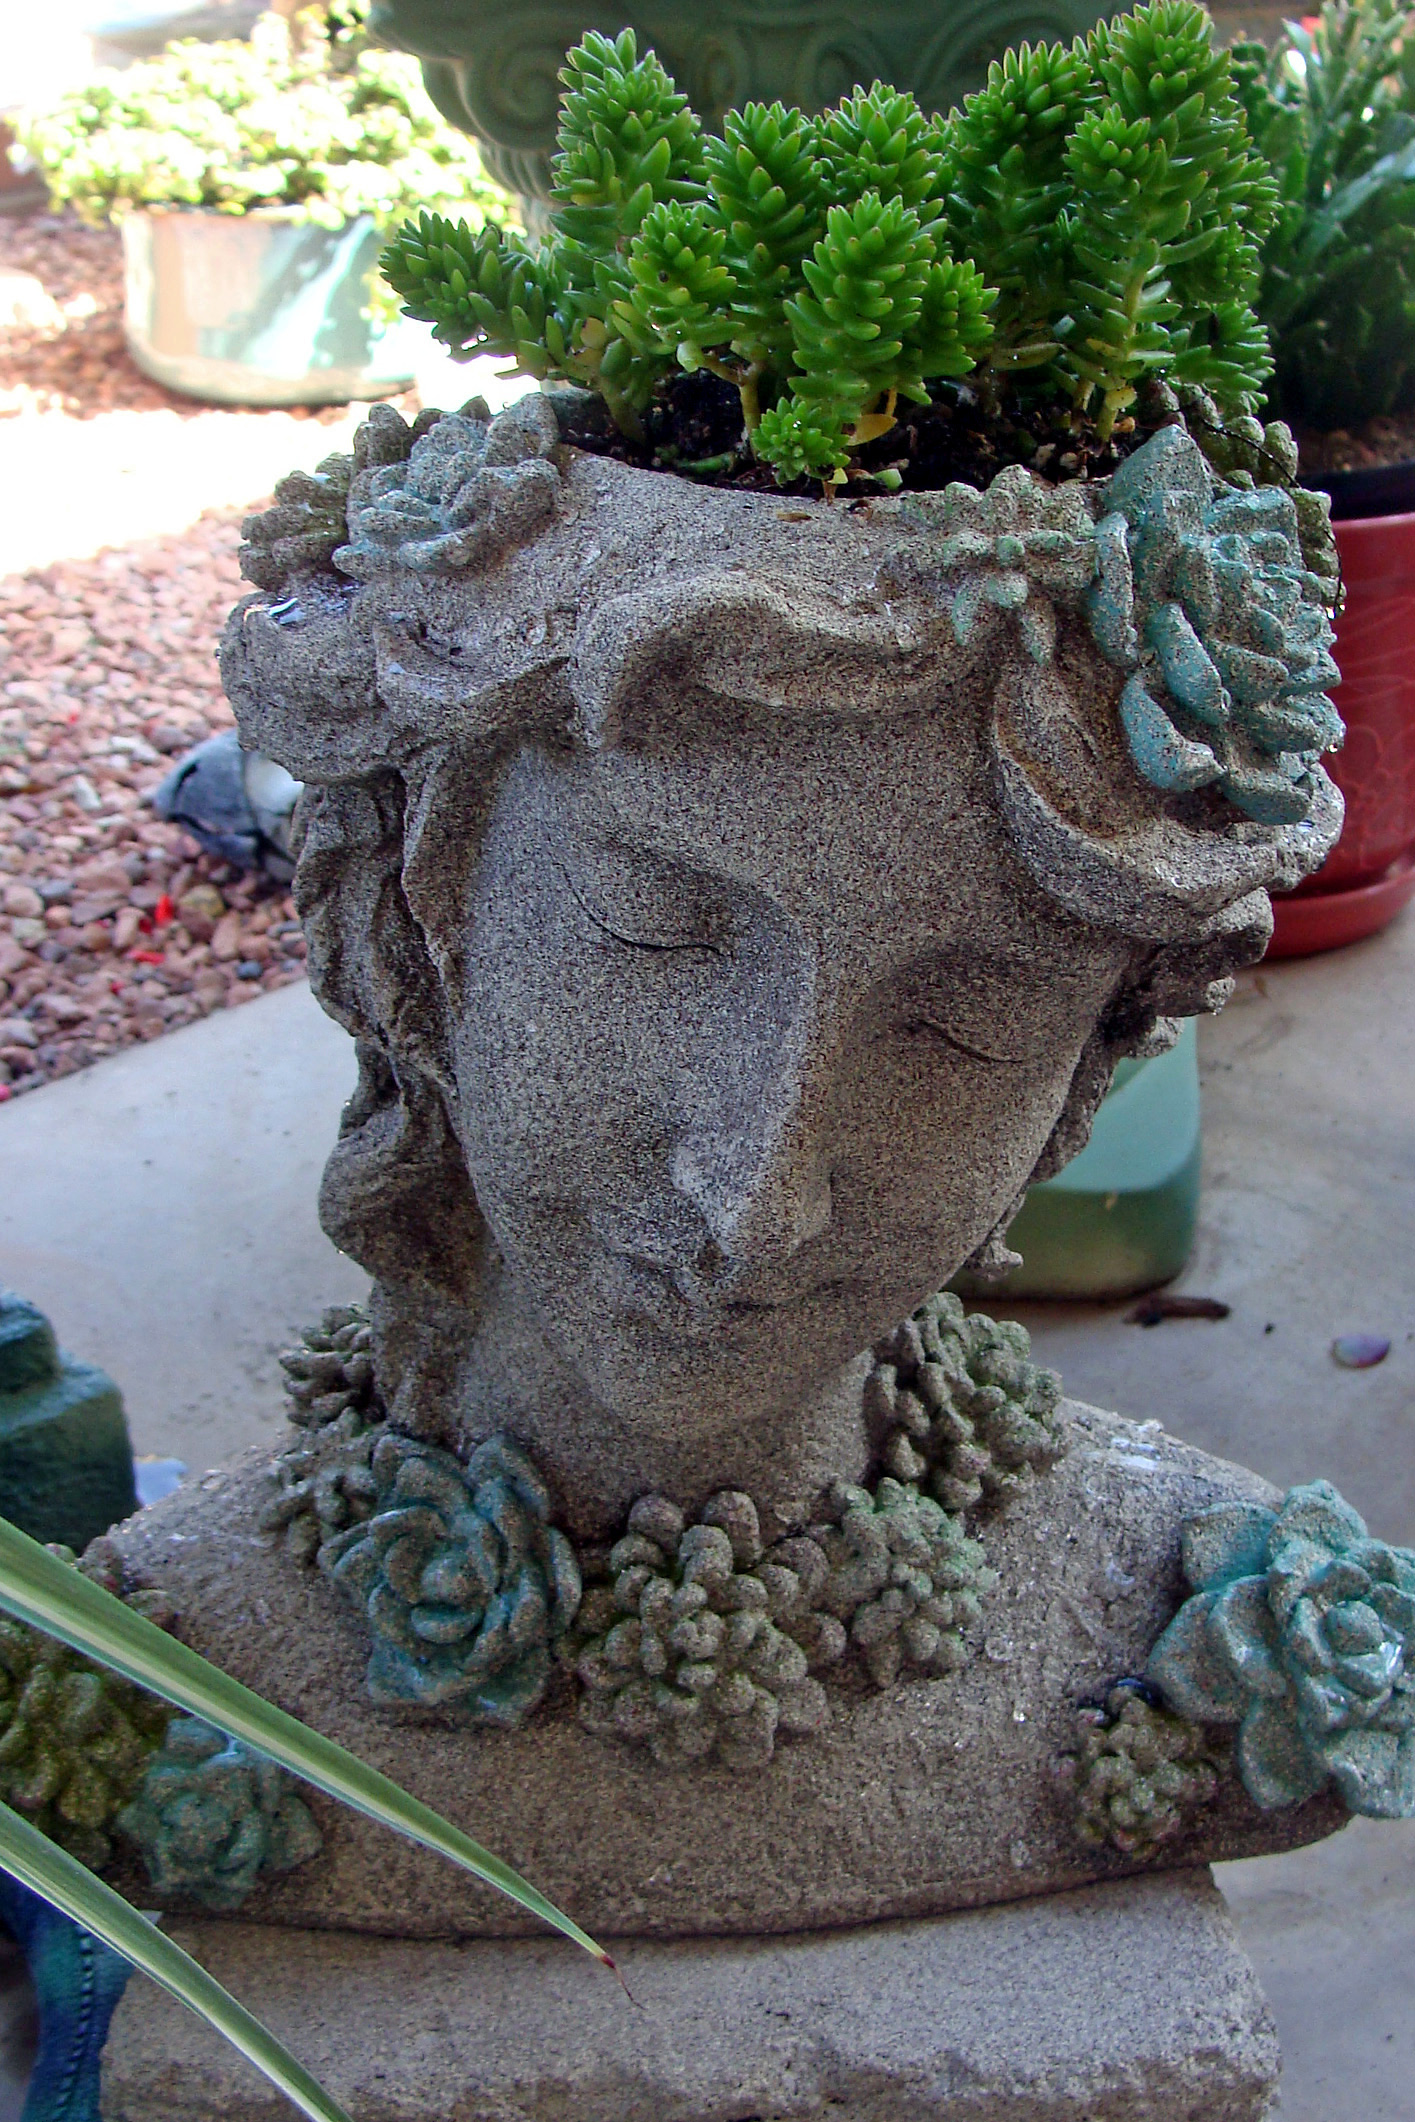 Dazzling Head Planters Will Add Some Fun To Your Garden